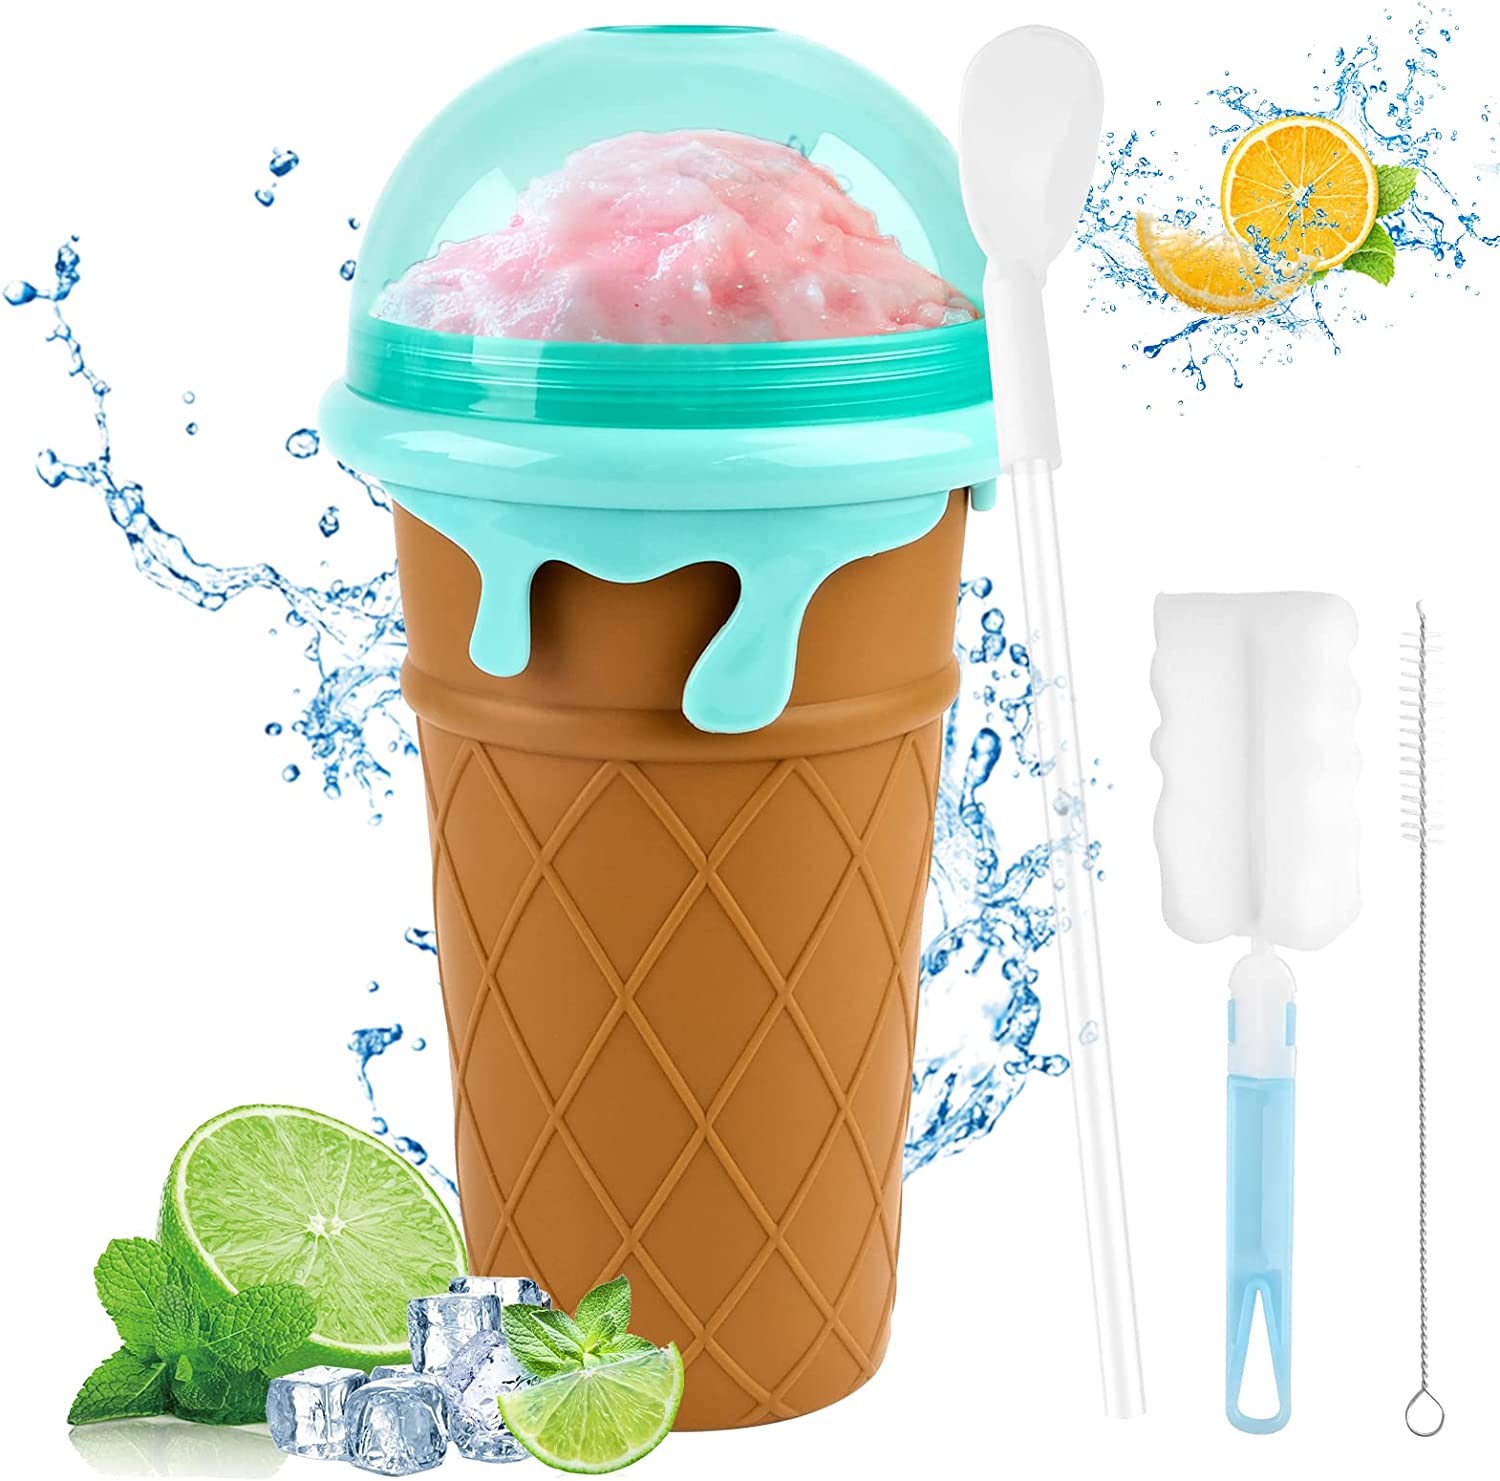 WUGU Slushy Cup, 500 ml Silicone Slushy Maker Cup with 2 in 1 Straw and Spoon, Slushy Ice Cream Cup with Cleaning Brush, Slushy Maker Cup for Various Drinks Smoothies (Brown)